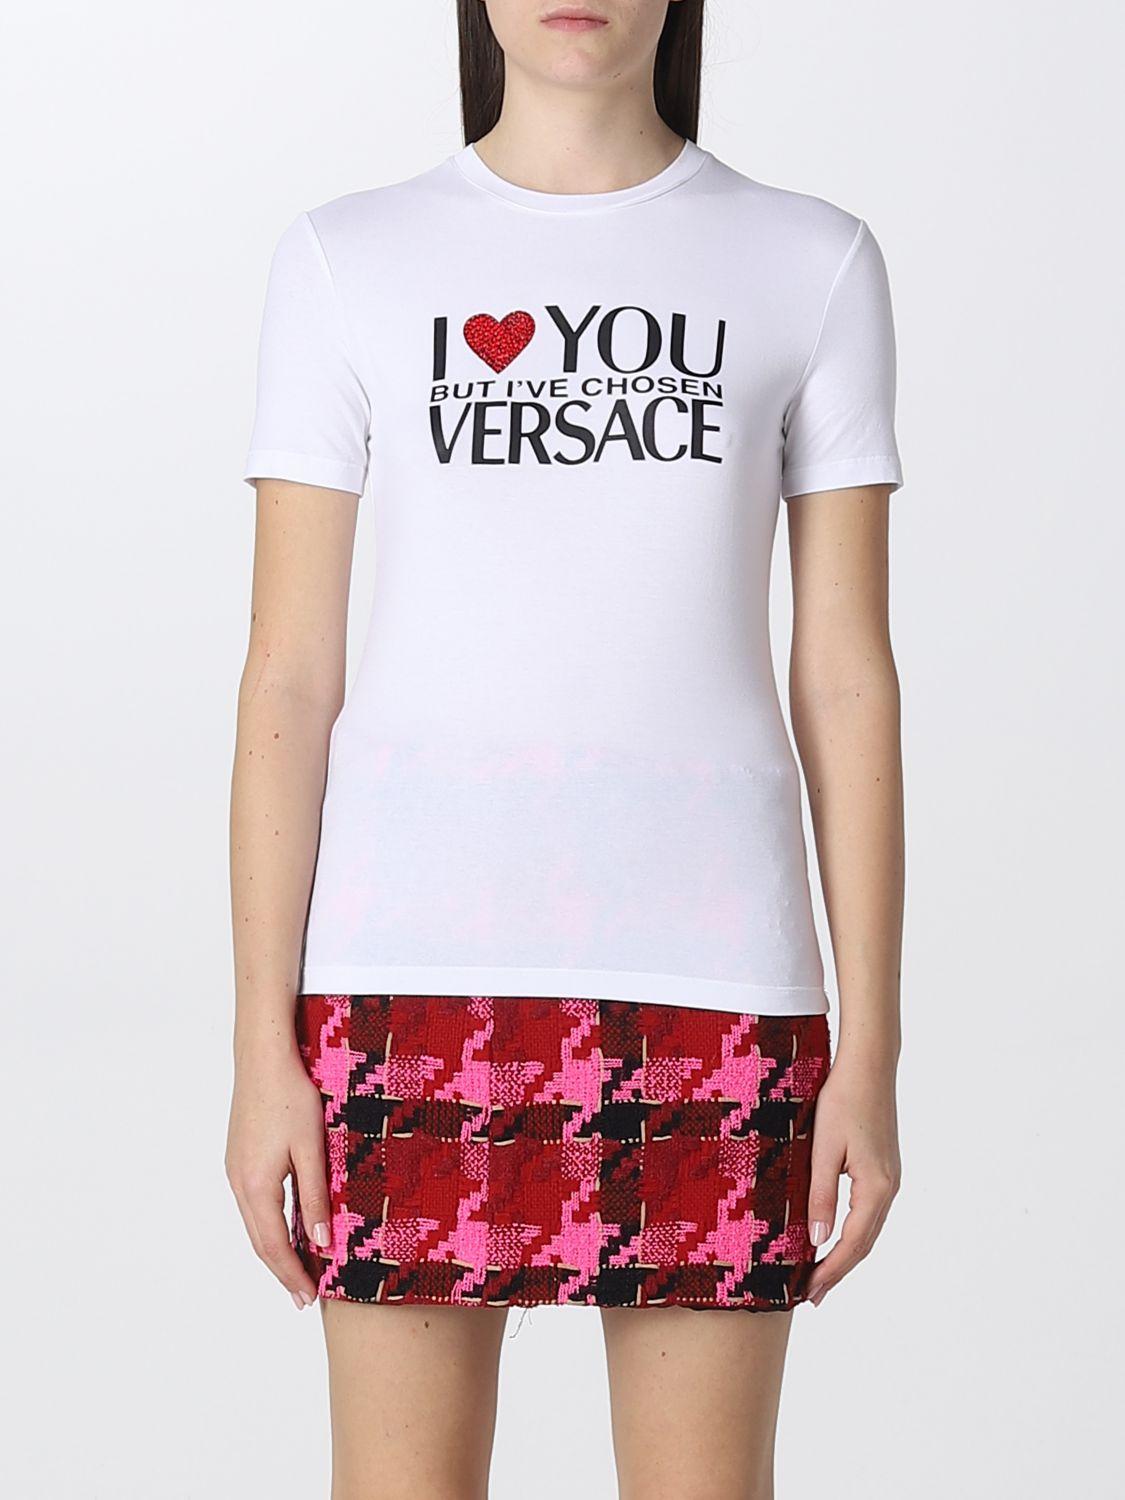 Klemme stave Fil Versace T-shirt With I Love You But I've Chosen Print in White | Lyst